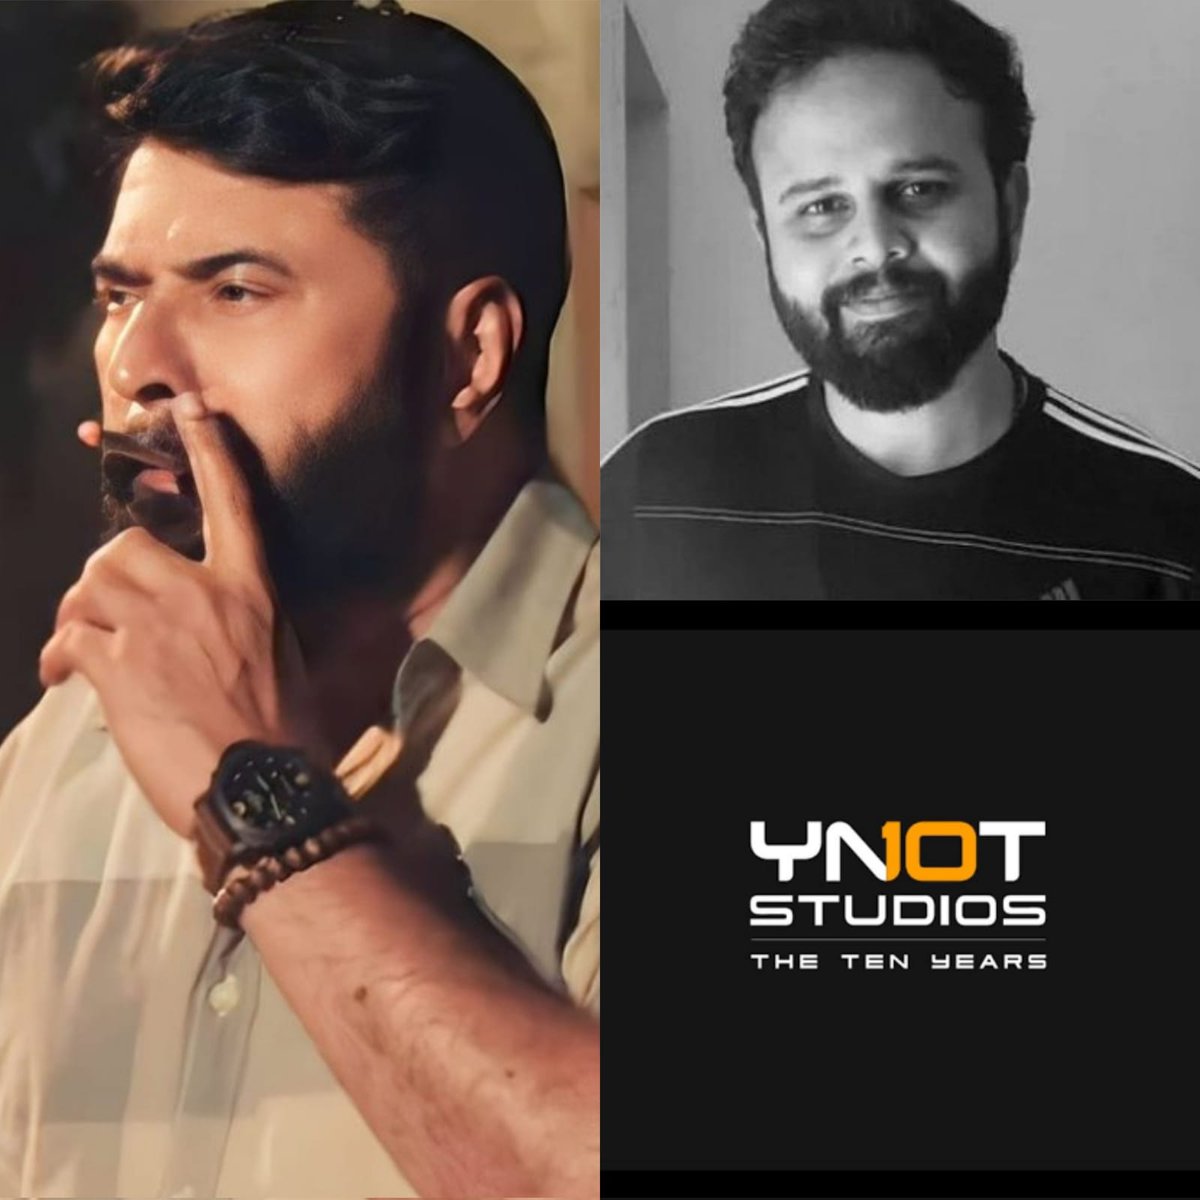 Reports:

Daring & Successful production banner who went on to produce multiple noteworthy Tamil films, #YNotStudios are set to make their direct Malayalam debut with #Mammootty's Rahul Sadasivan film which is touted to be a horror thriller film.

Shoot starts from Jun end /July.